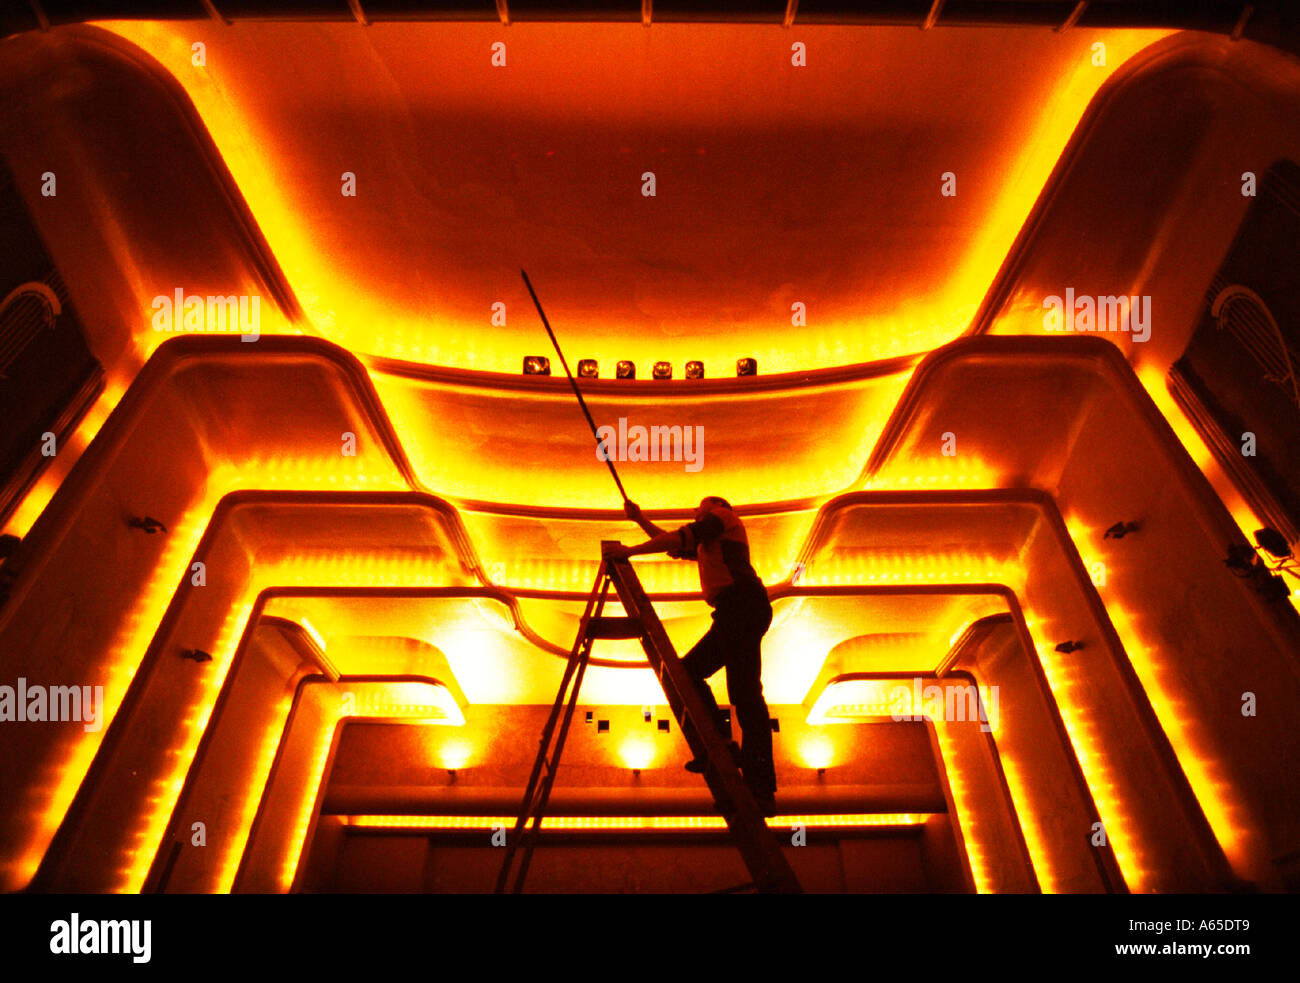 Theater-Manager Jeremy Höhle passt die Beleuchtung in privaten 1938 Art-Deco-Theater von Stanford Hall, Nottinghamshire. Stockfoto